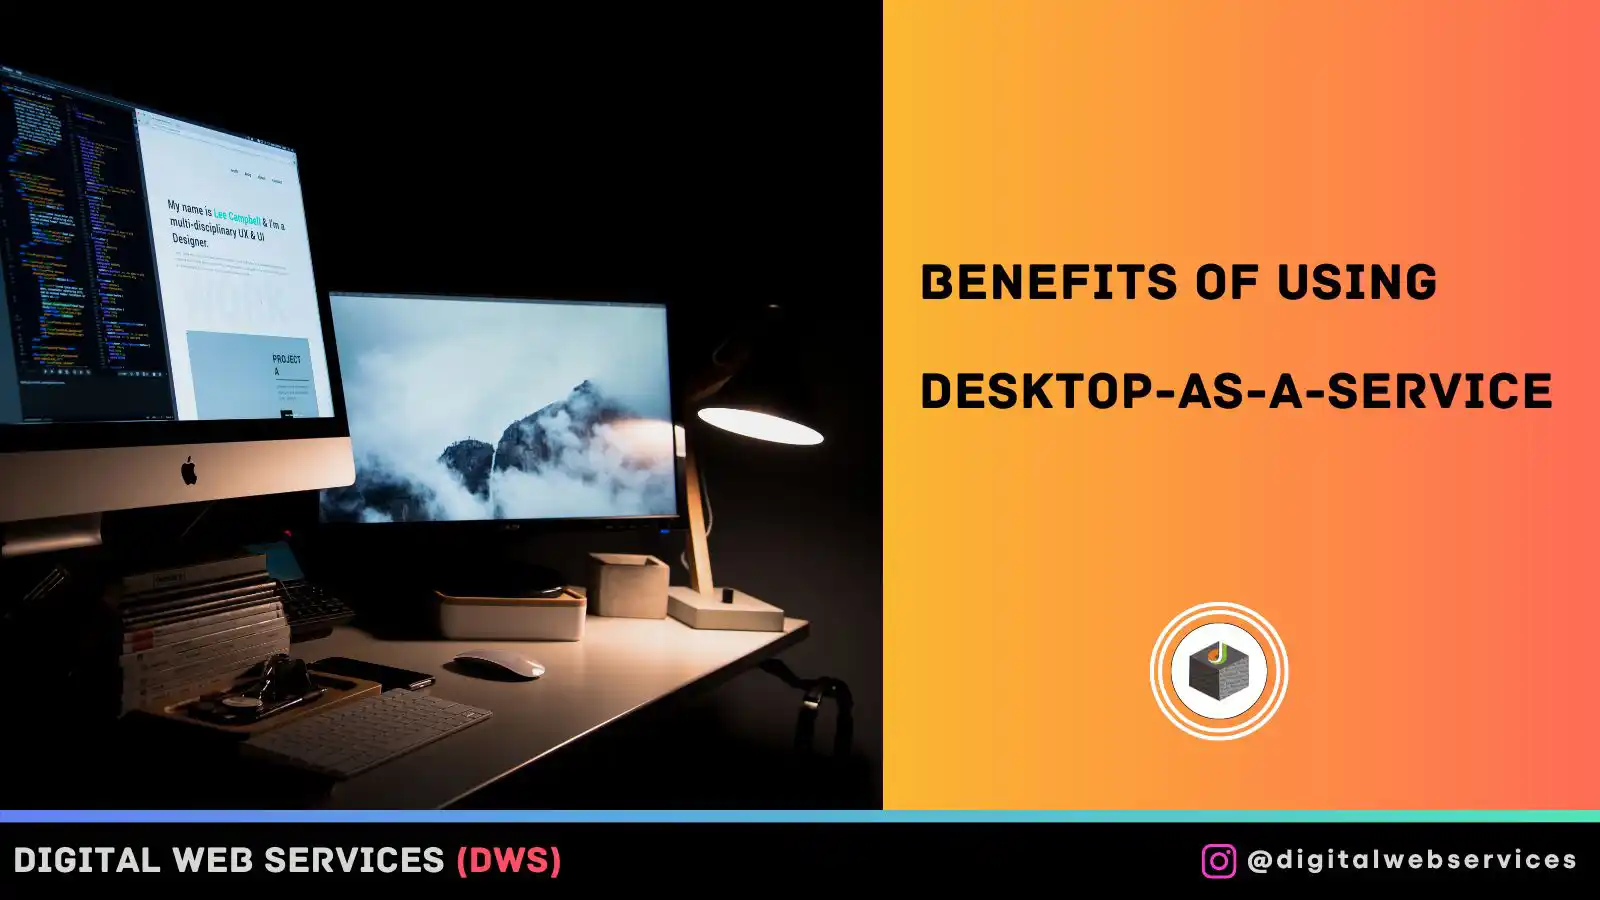 How Can Desktop-as-a-Service Be Beneficial for You